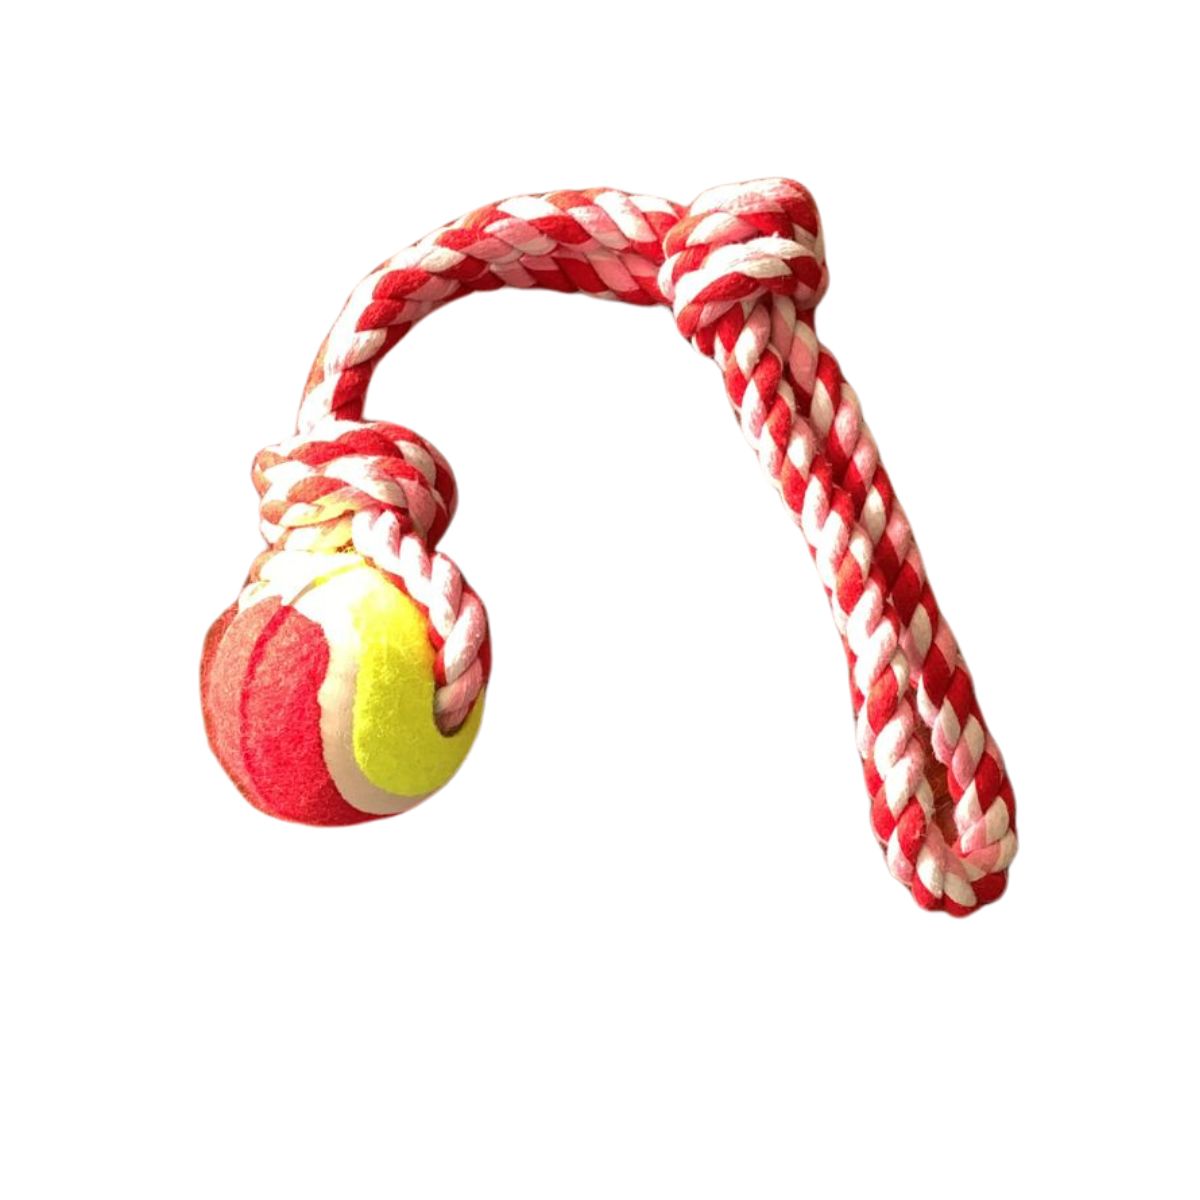 2 Knots Cotton Rope Single Tennis Ball Toy